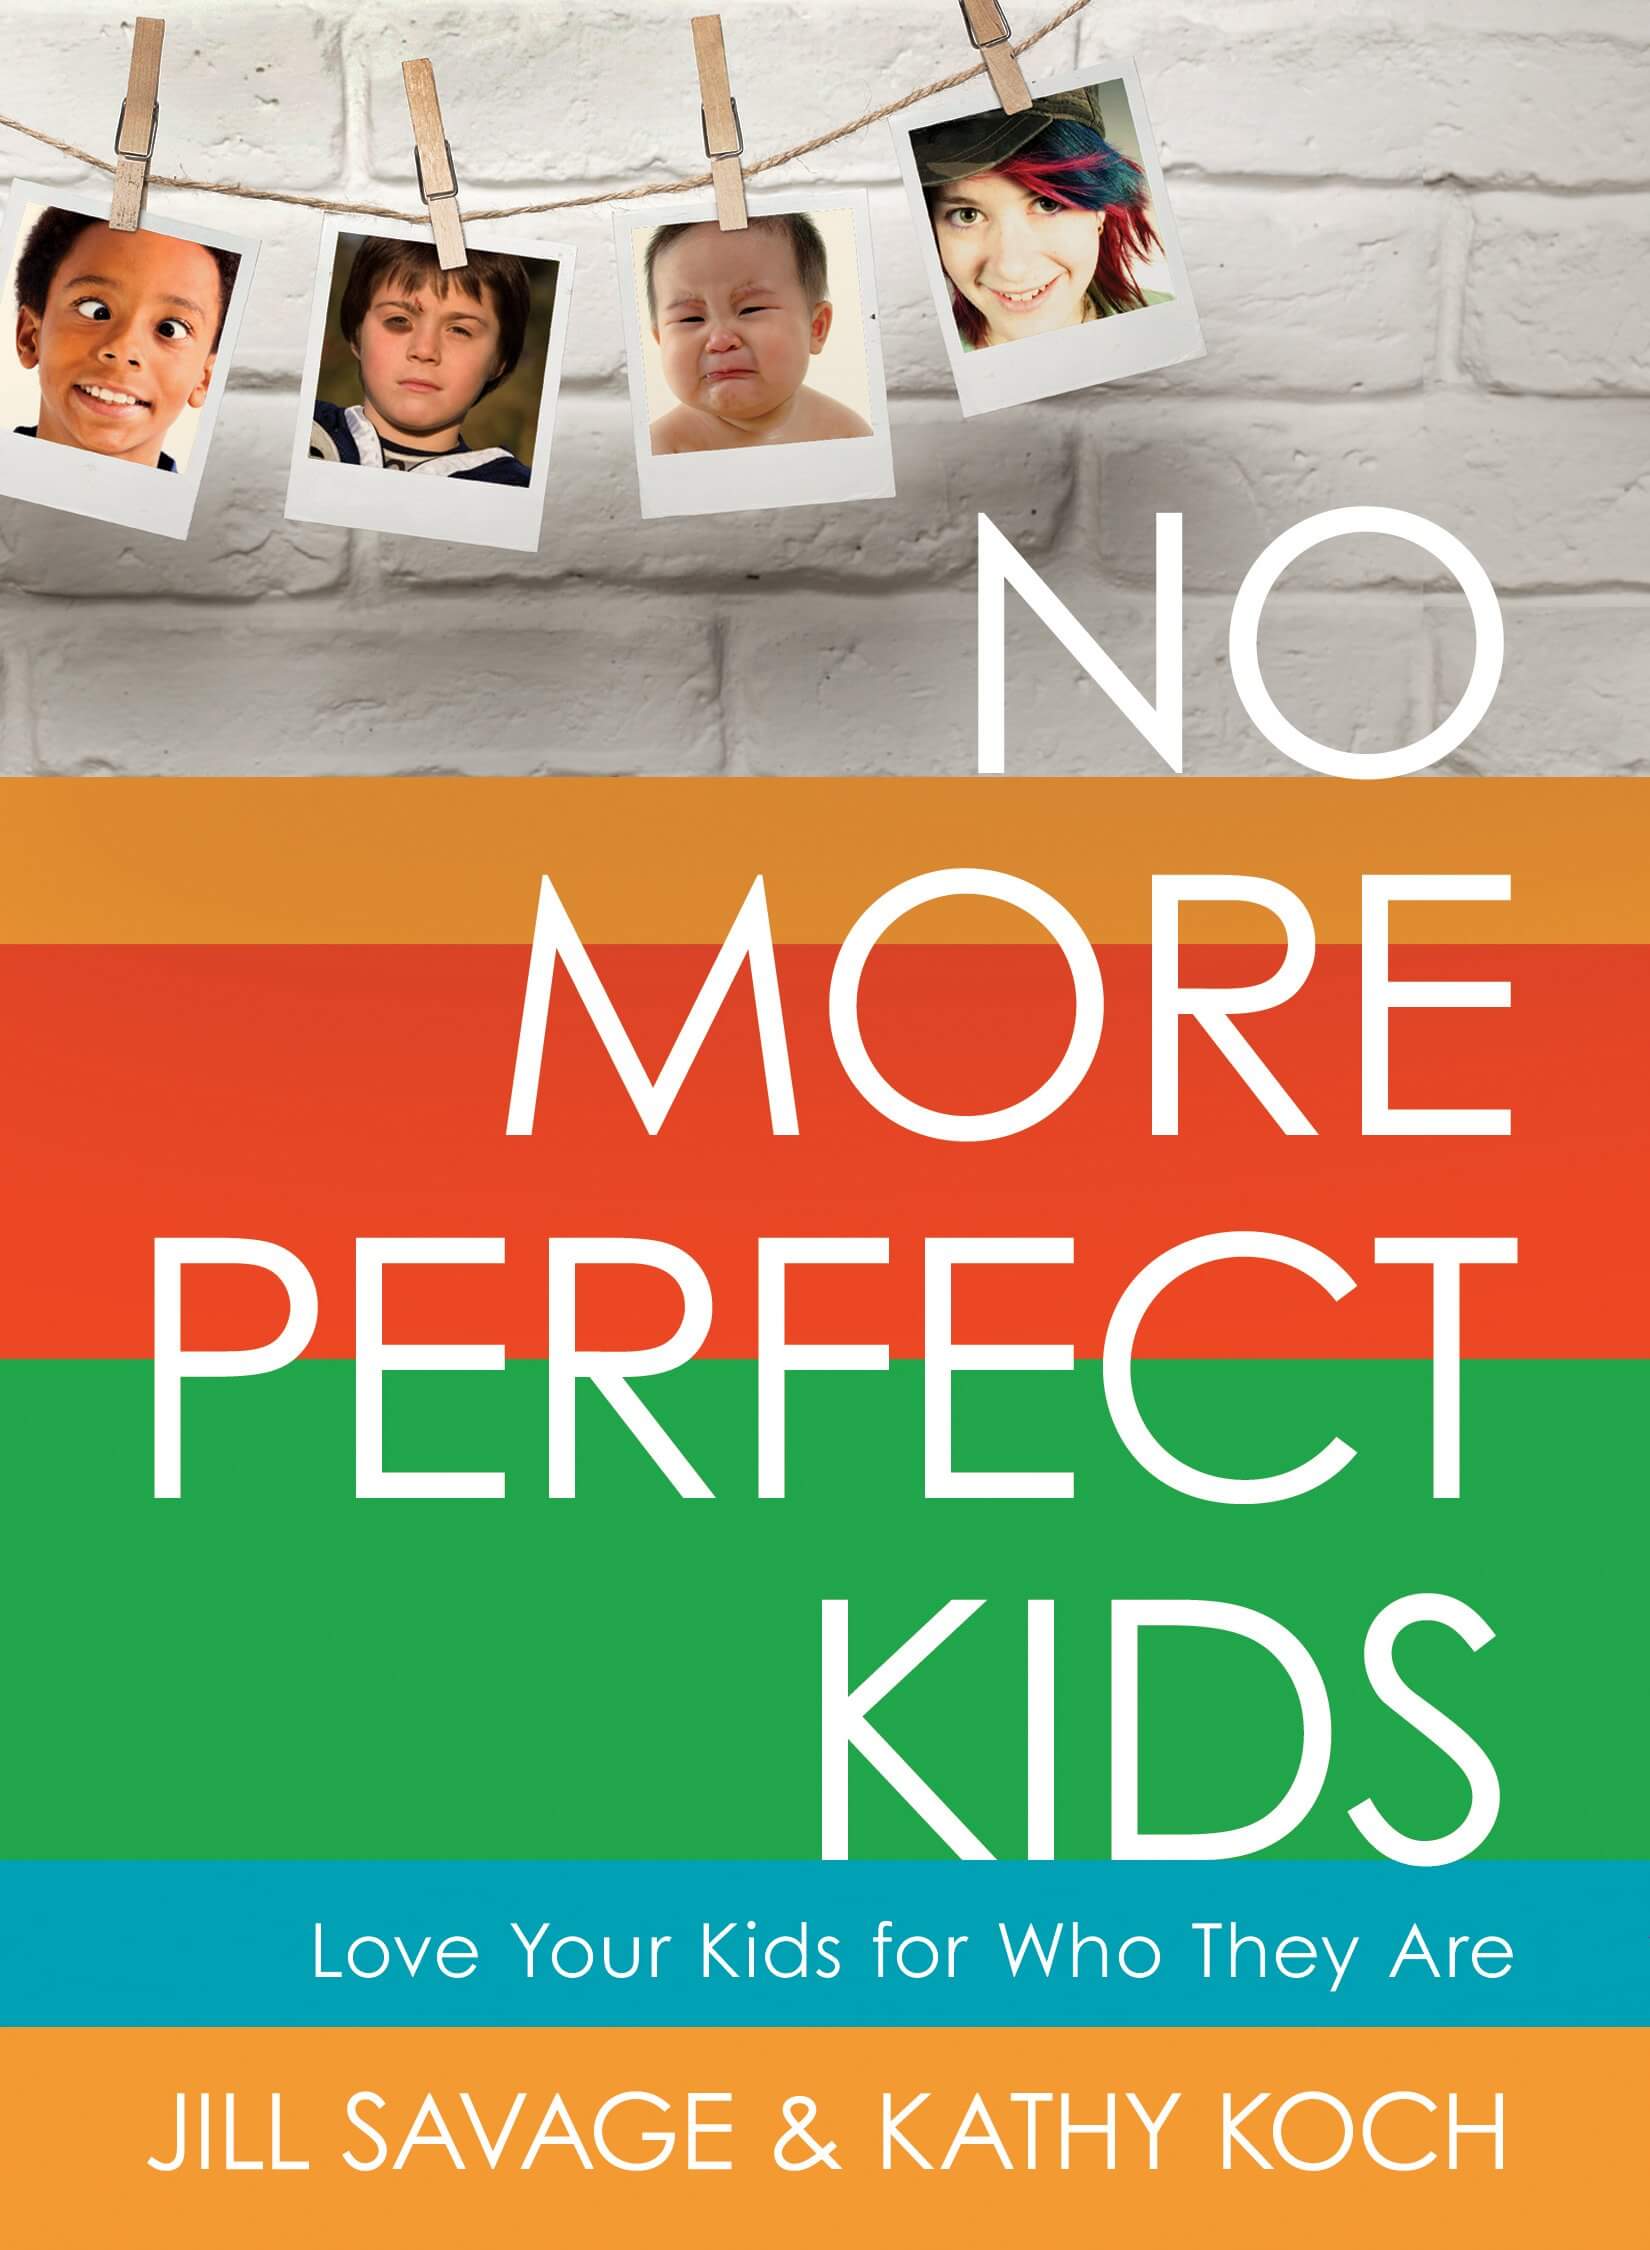 No More Perfect Kids Book by Jill Savage